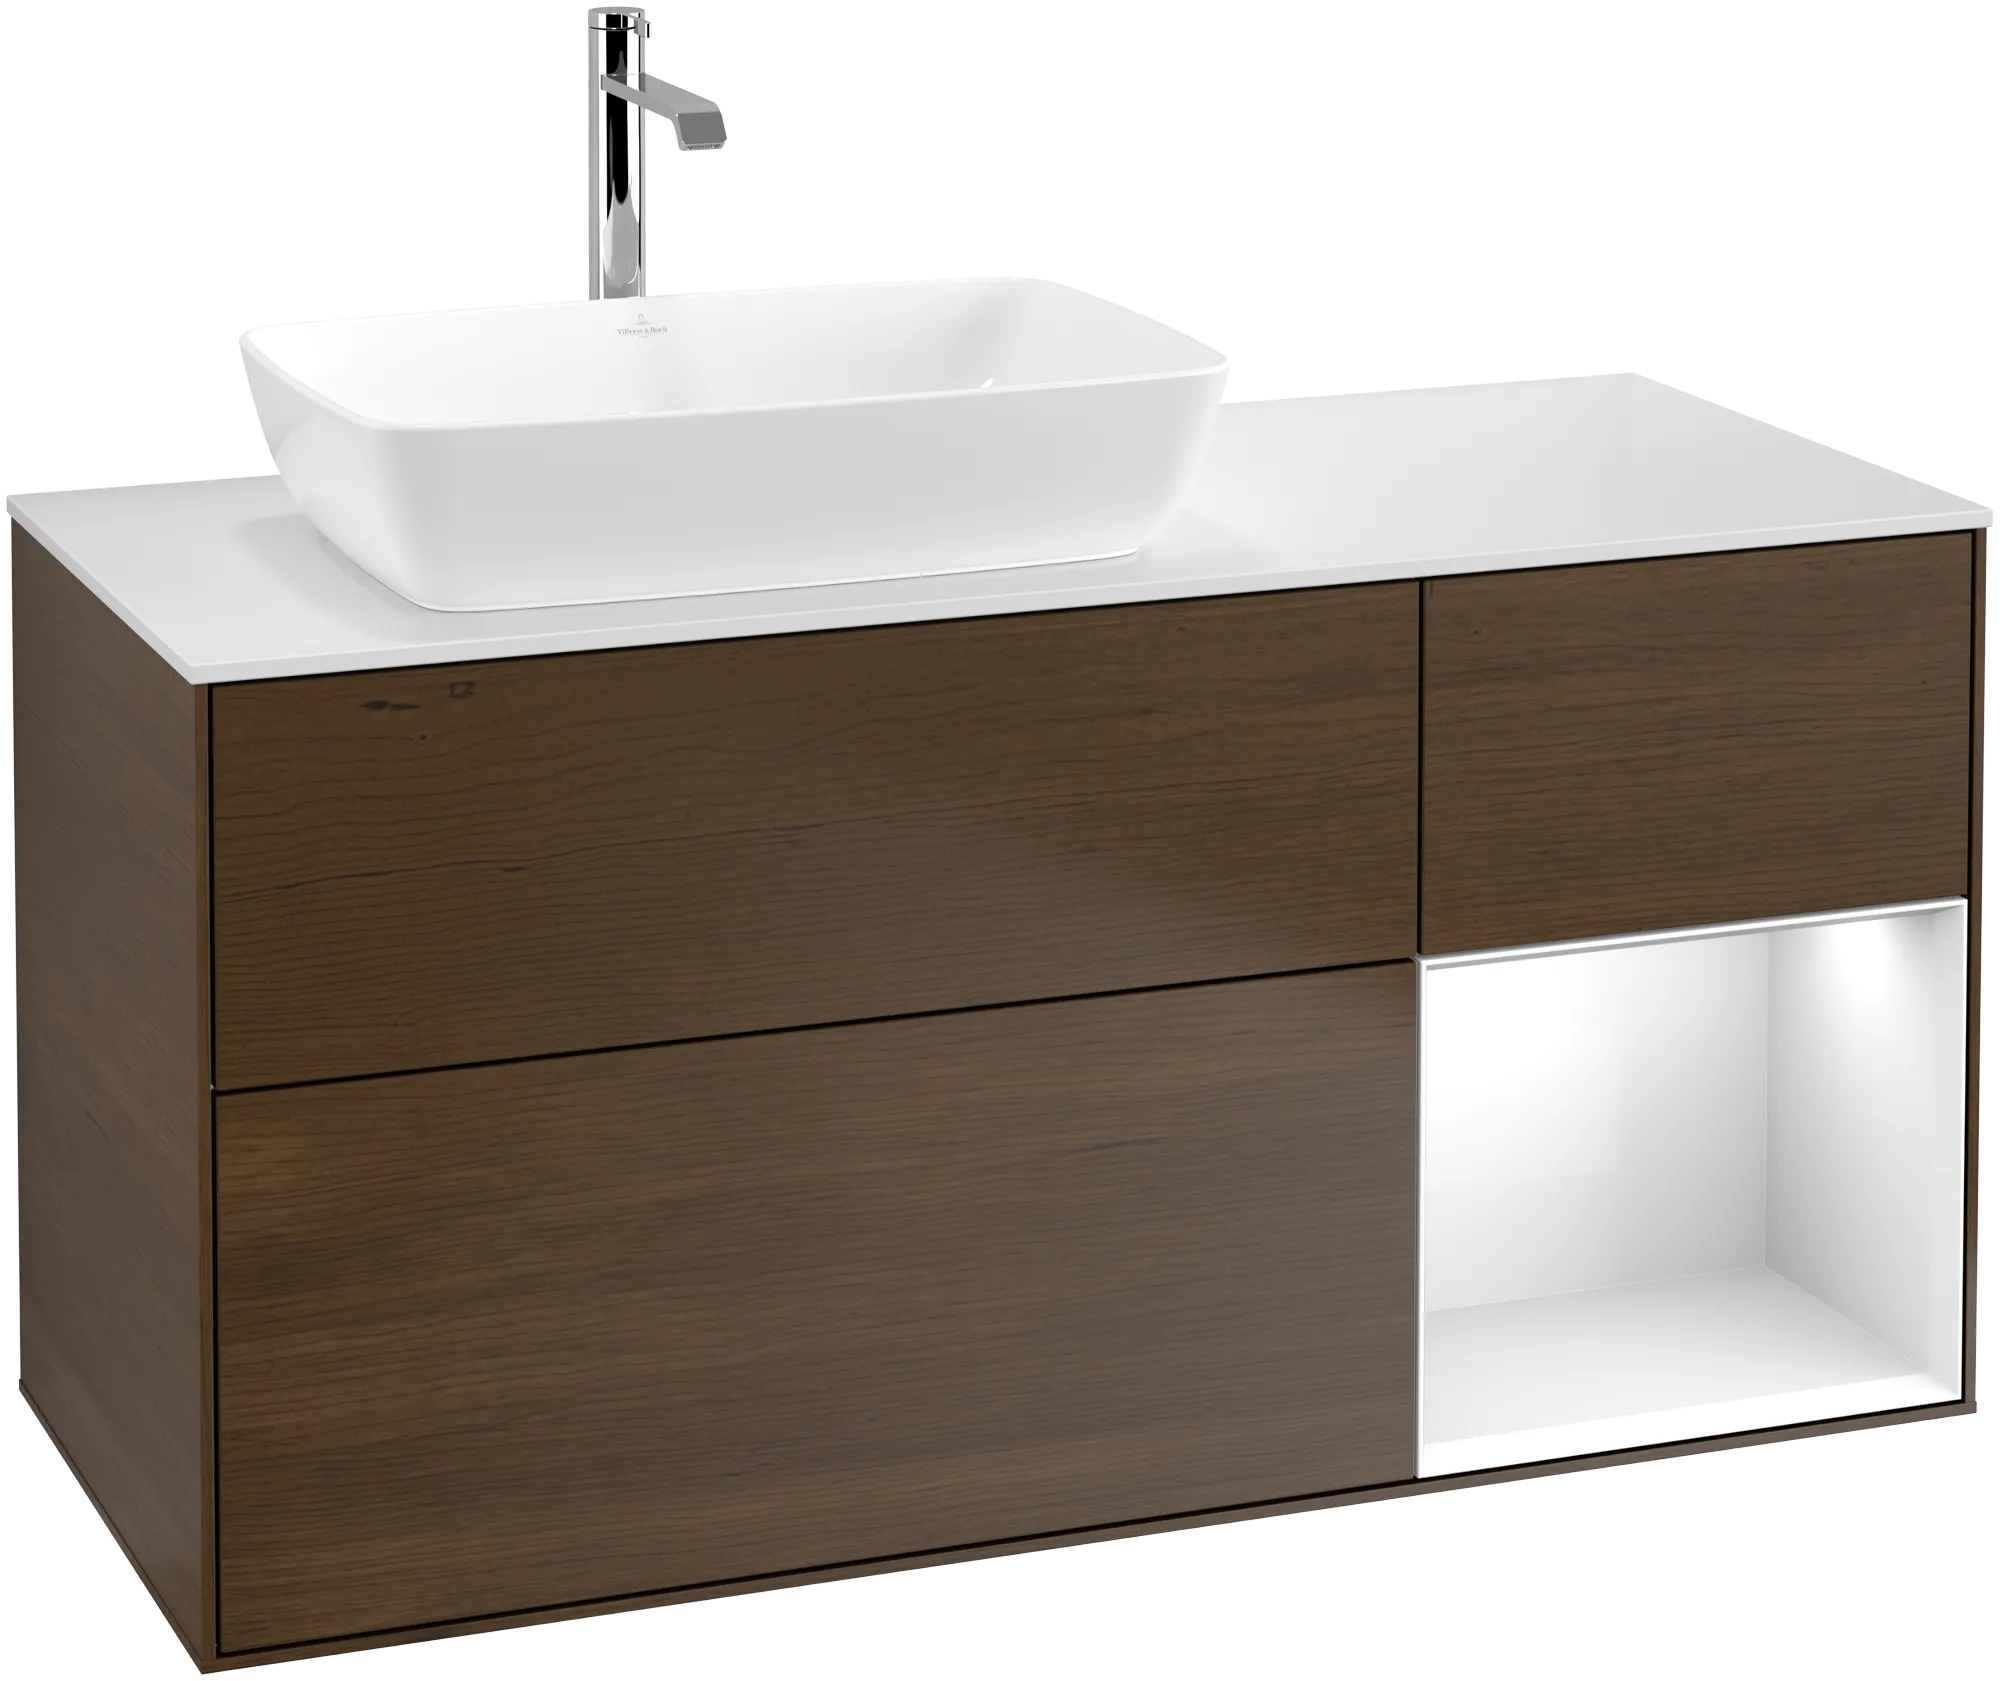 Obrázek VILLEROY BOCH Finion Vanity unit, with lighting, 3 pull-out compartments, 1200 x 603 x 501 mm, Walnut Veneer / Glossy White Lacquer / Glass White Matt #G811GFGN